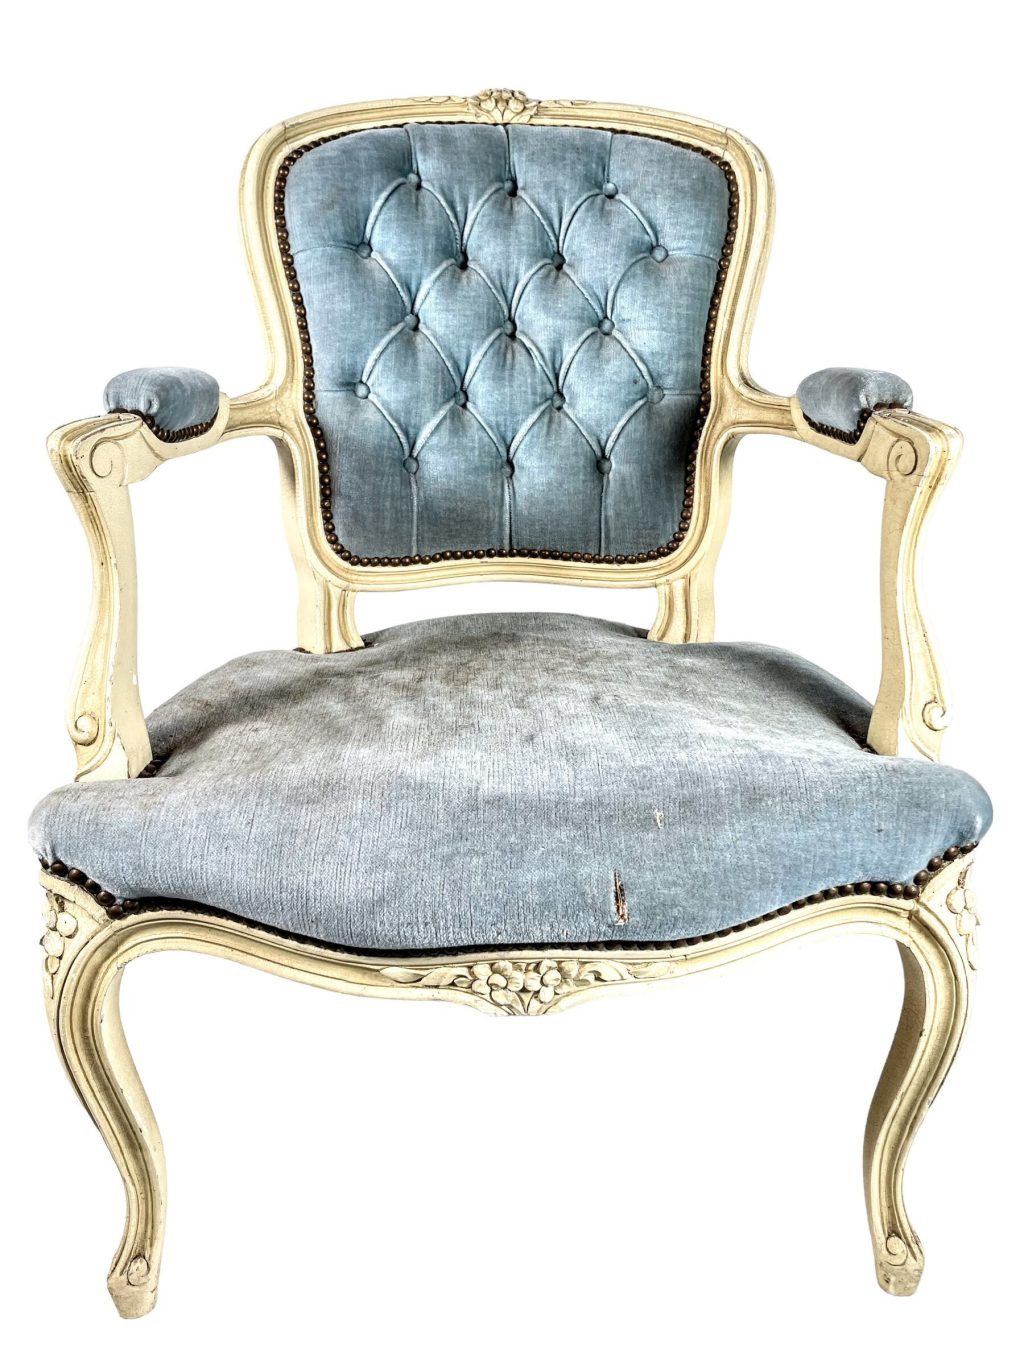 Antique French Louis XV Styled Project Chair Cushioned Chair Wooden Needing Repair Refurbishment Seating c1910-20’s